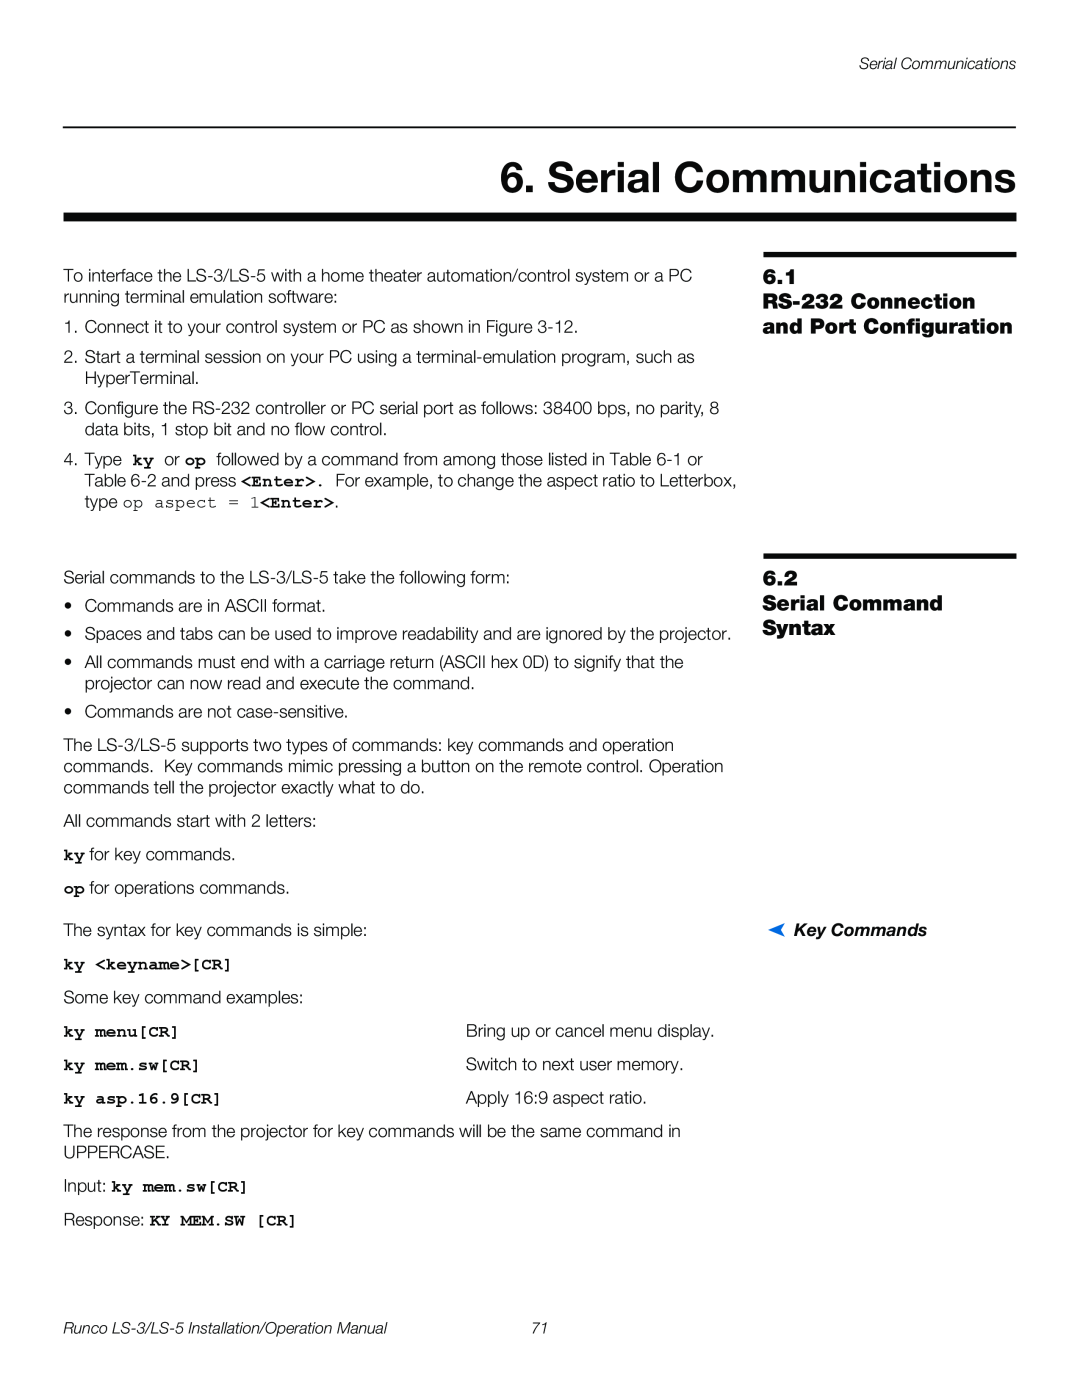 Runco LS-3, LS-5 operation manual Serial Communications, 6.1 RS-232Connection and Port Configuration, Serial Command Syntax 